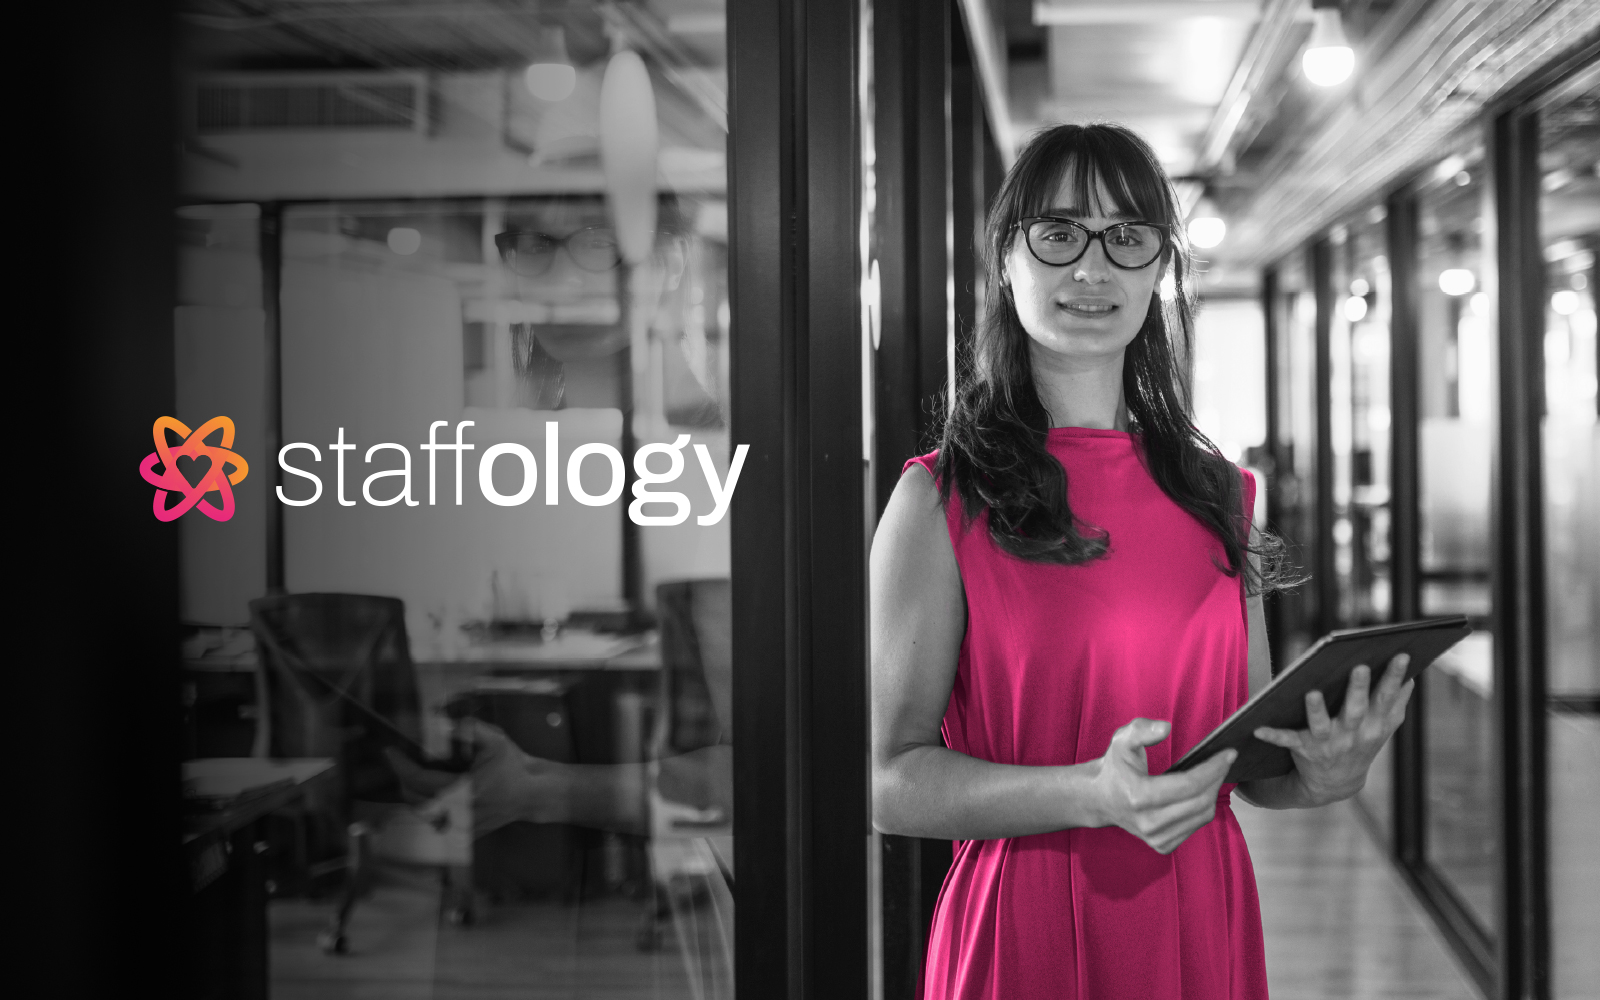 Staffology: new brand powered by smiles  